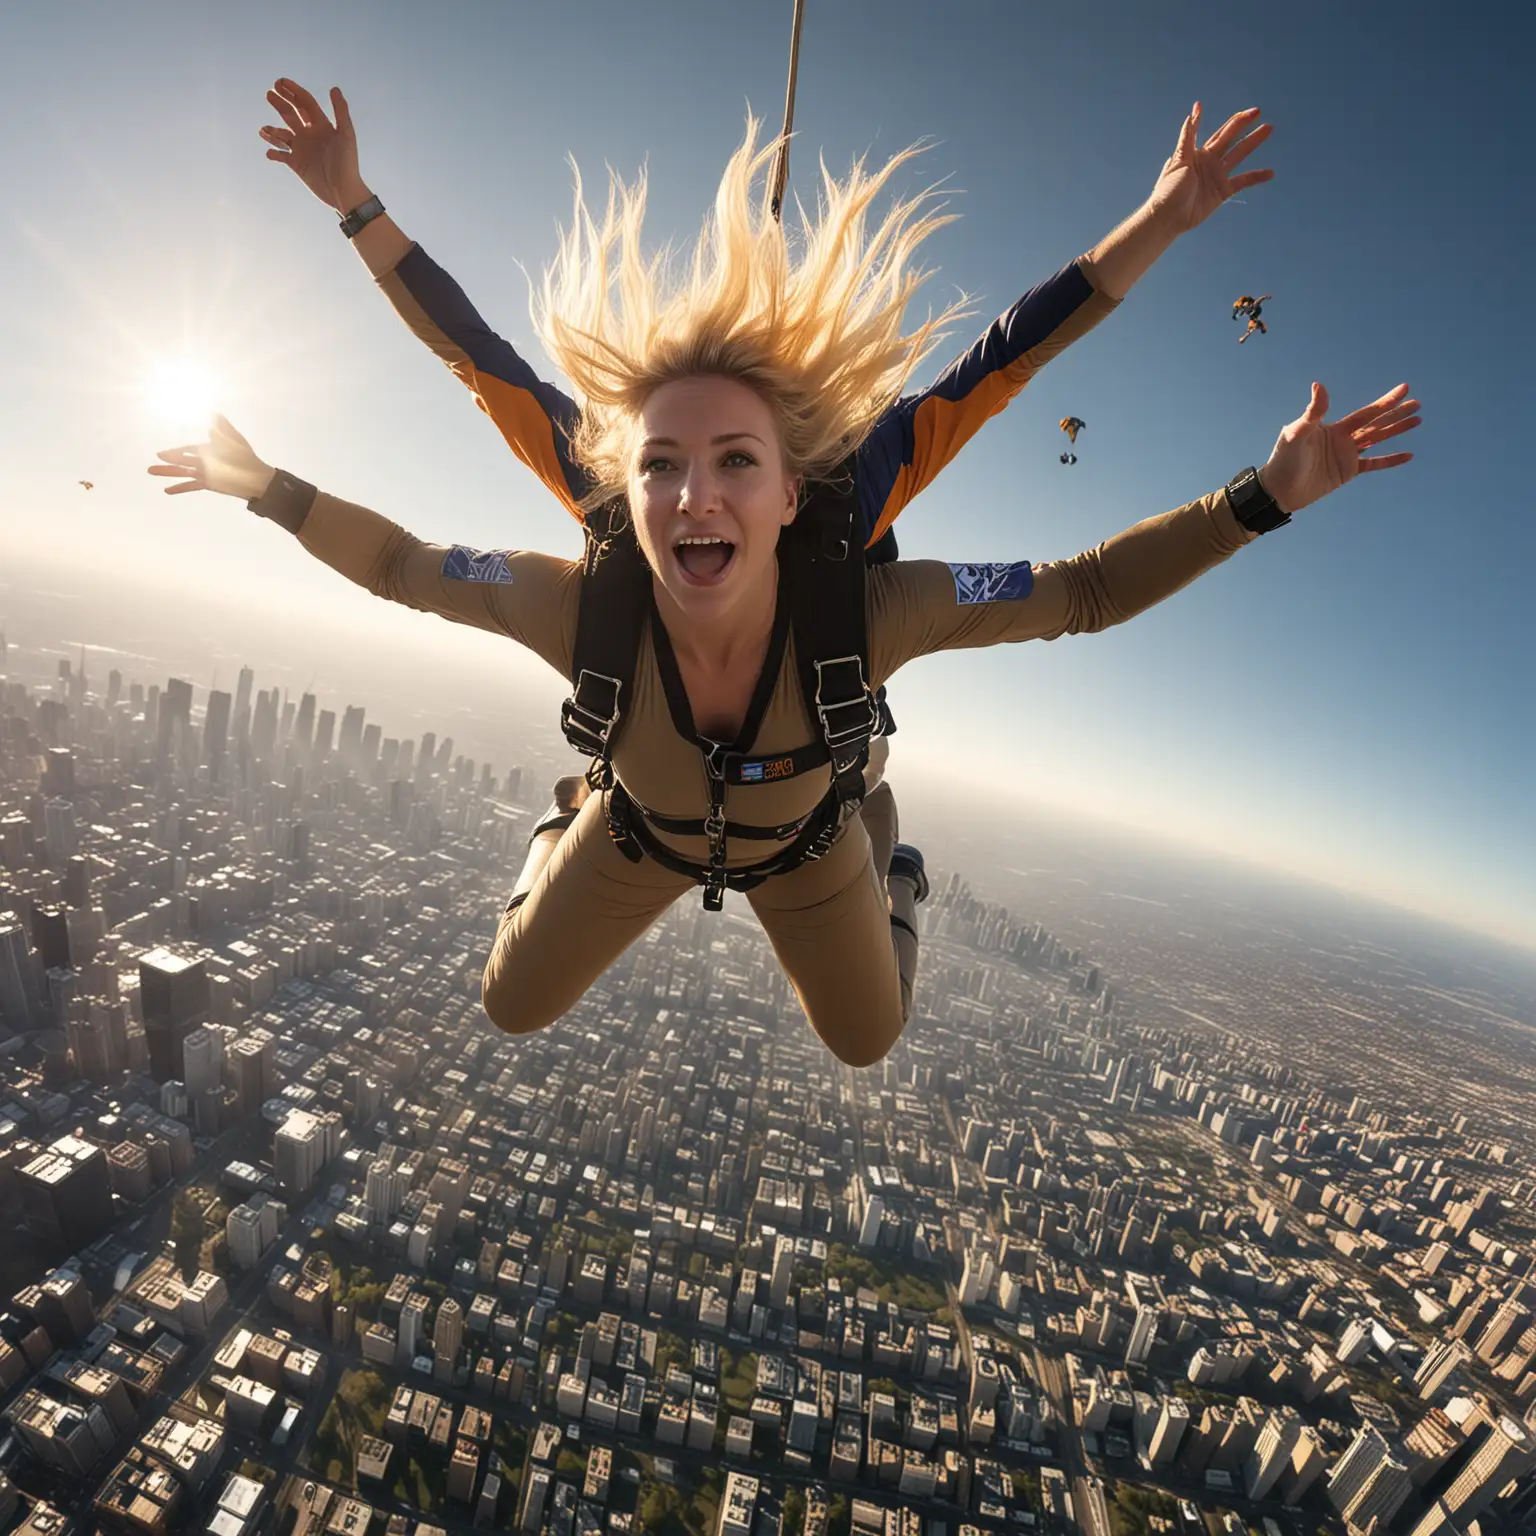 envision a blonde woman falling backwards to skydive with parachute beginning to deploy. eyelevel details of the skyline. looking down to a forrested area and city skyline. face illuminated by the sunlight. expression of satisfaction. bold, rich color.
